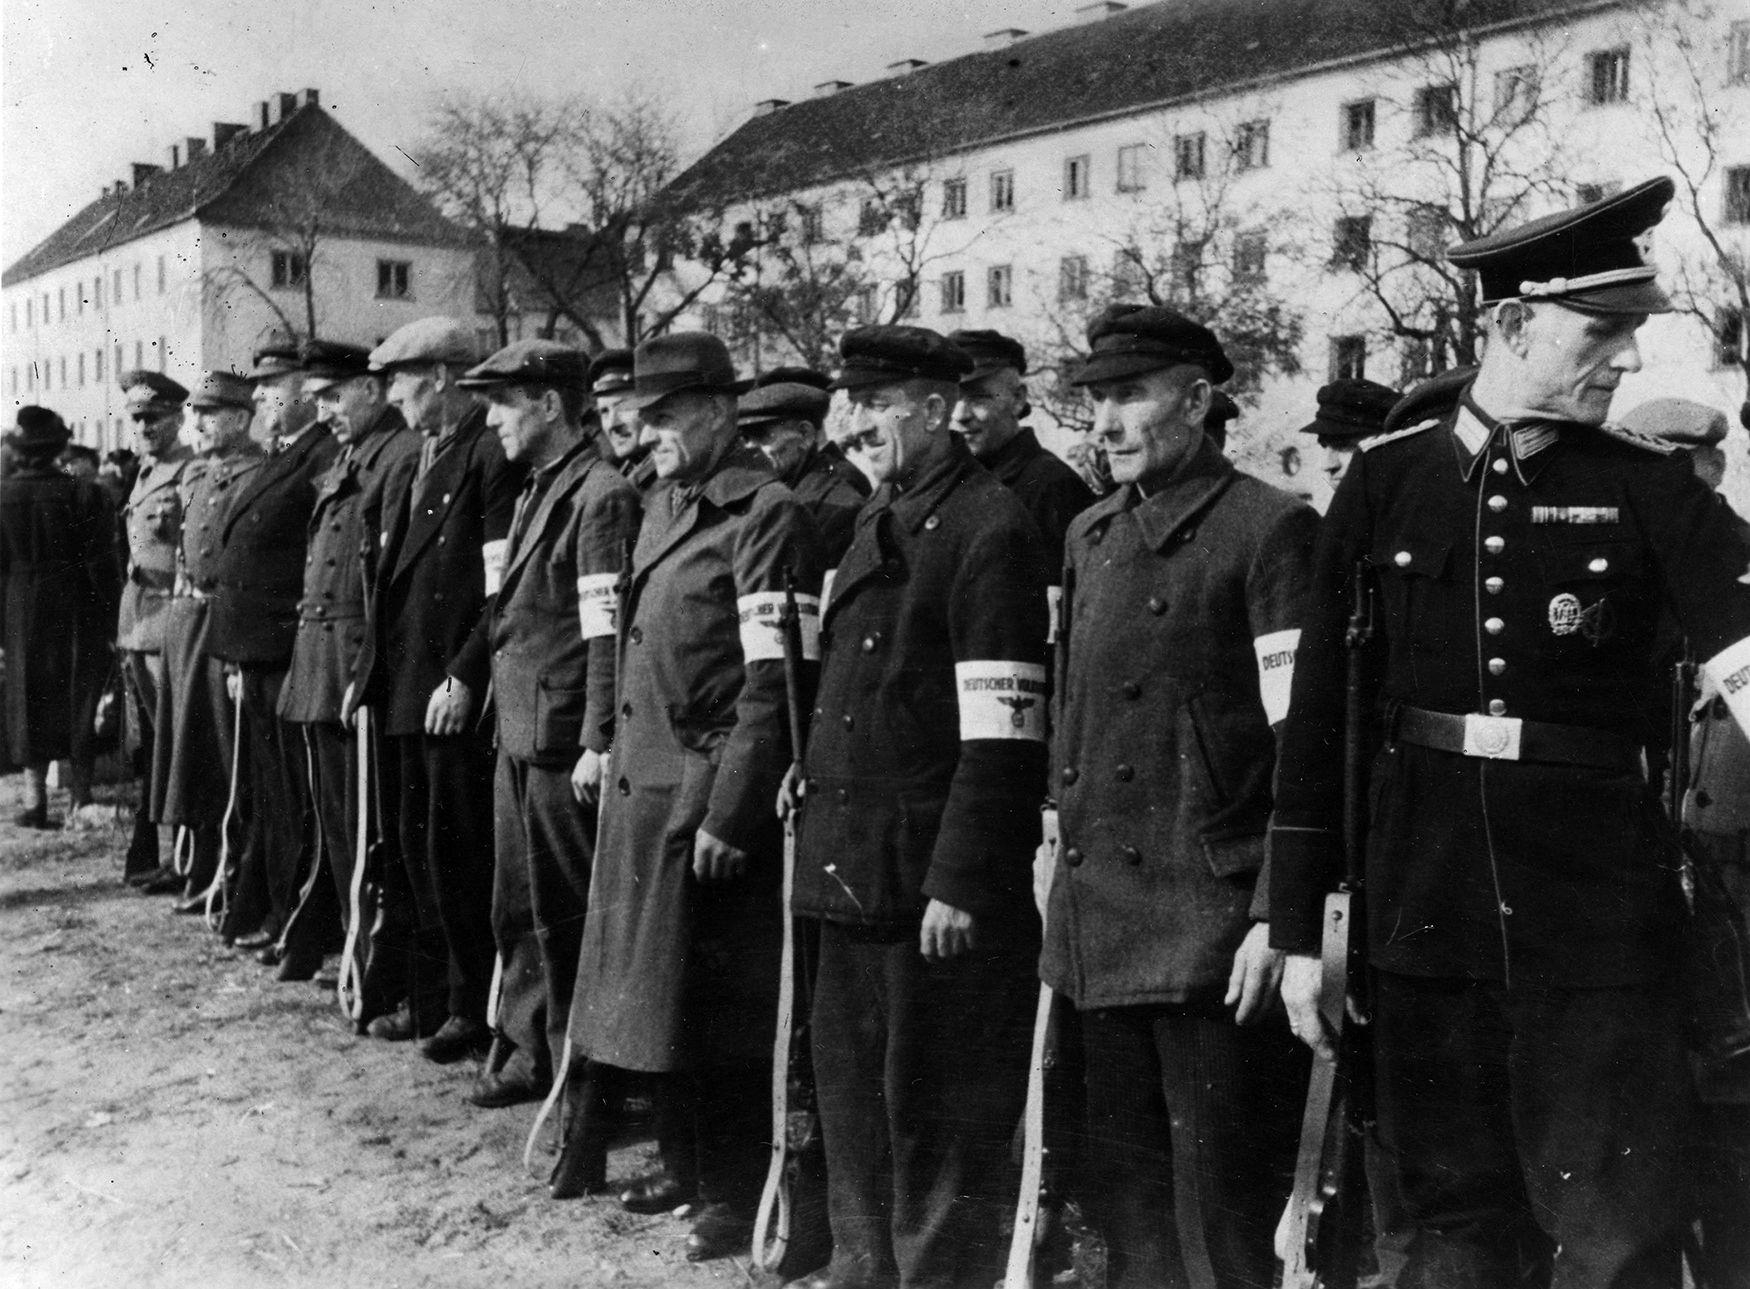 These old men of the Nazi Volksstürm assemble with rifles, soon to be committed to the defense of Berlin. The German defenders were decimated in the fight for the Nazi capital city.